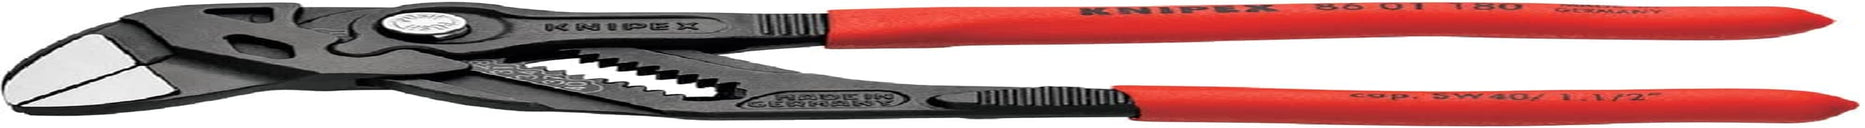 KNIPEX, KNIPEX Pliers Wrench Pliers and a Wrench in a Single Tool (180 Mm) 86 01 180, Red